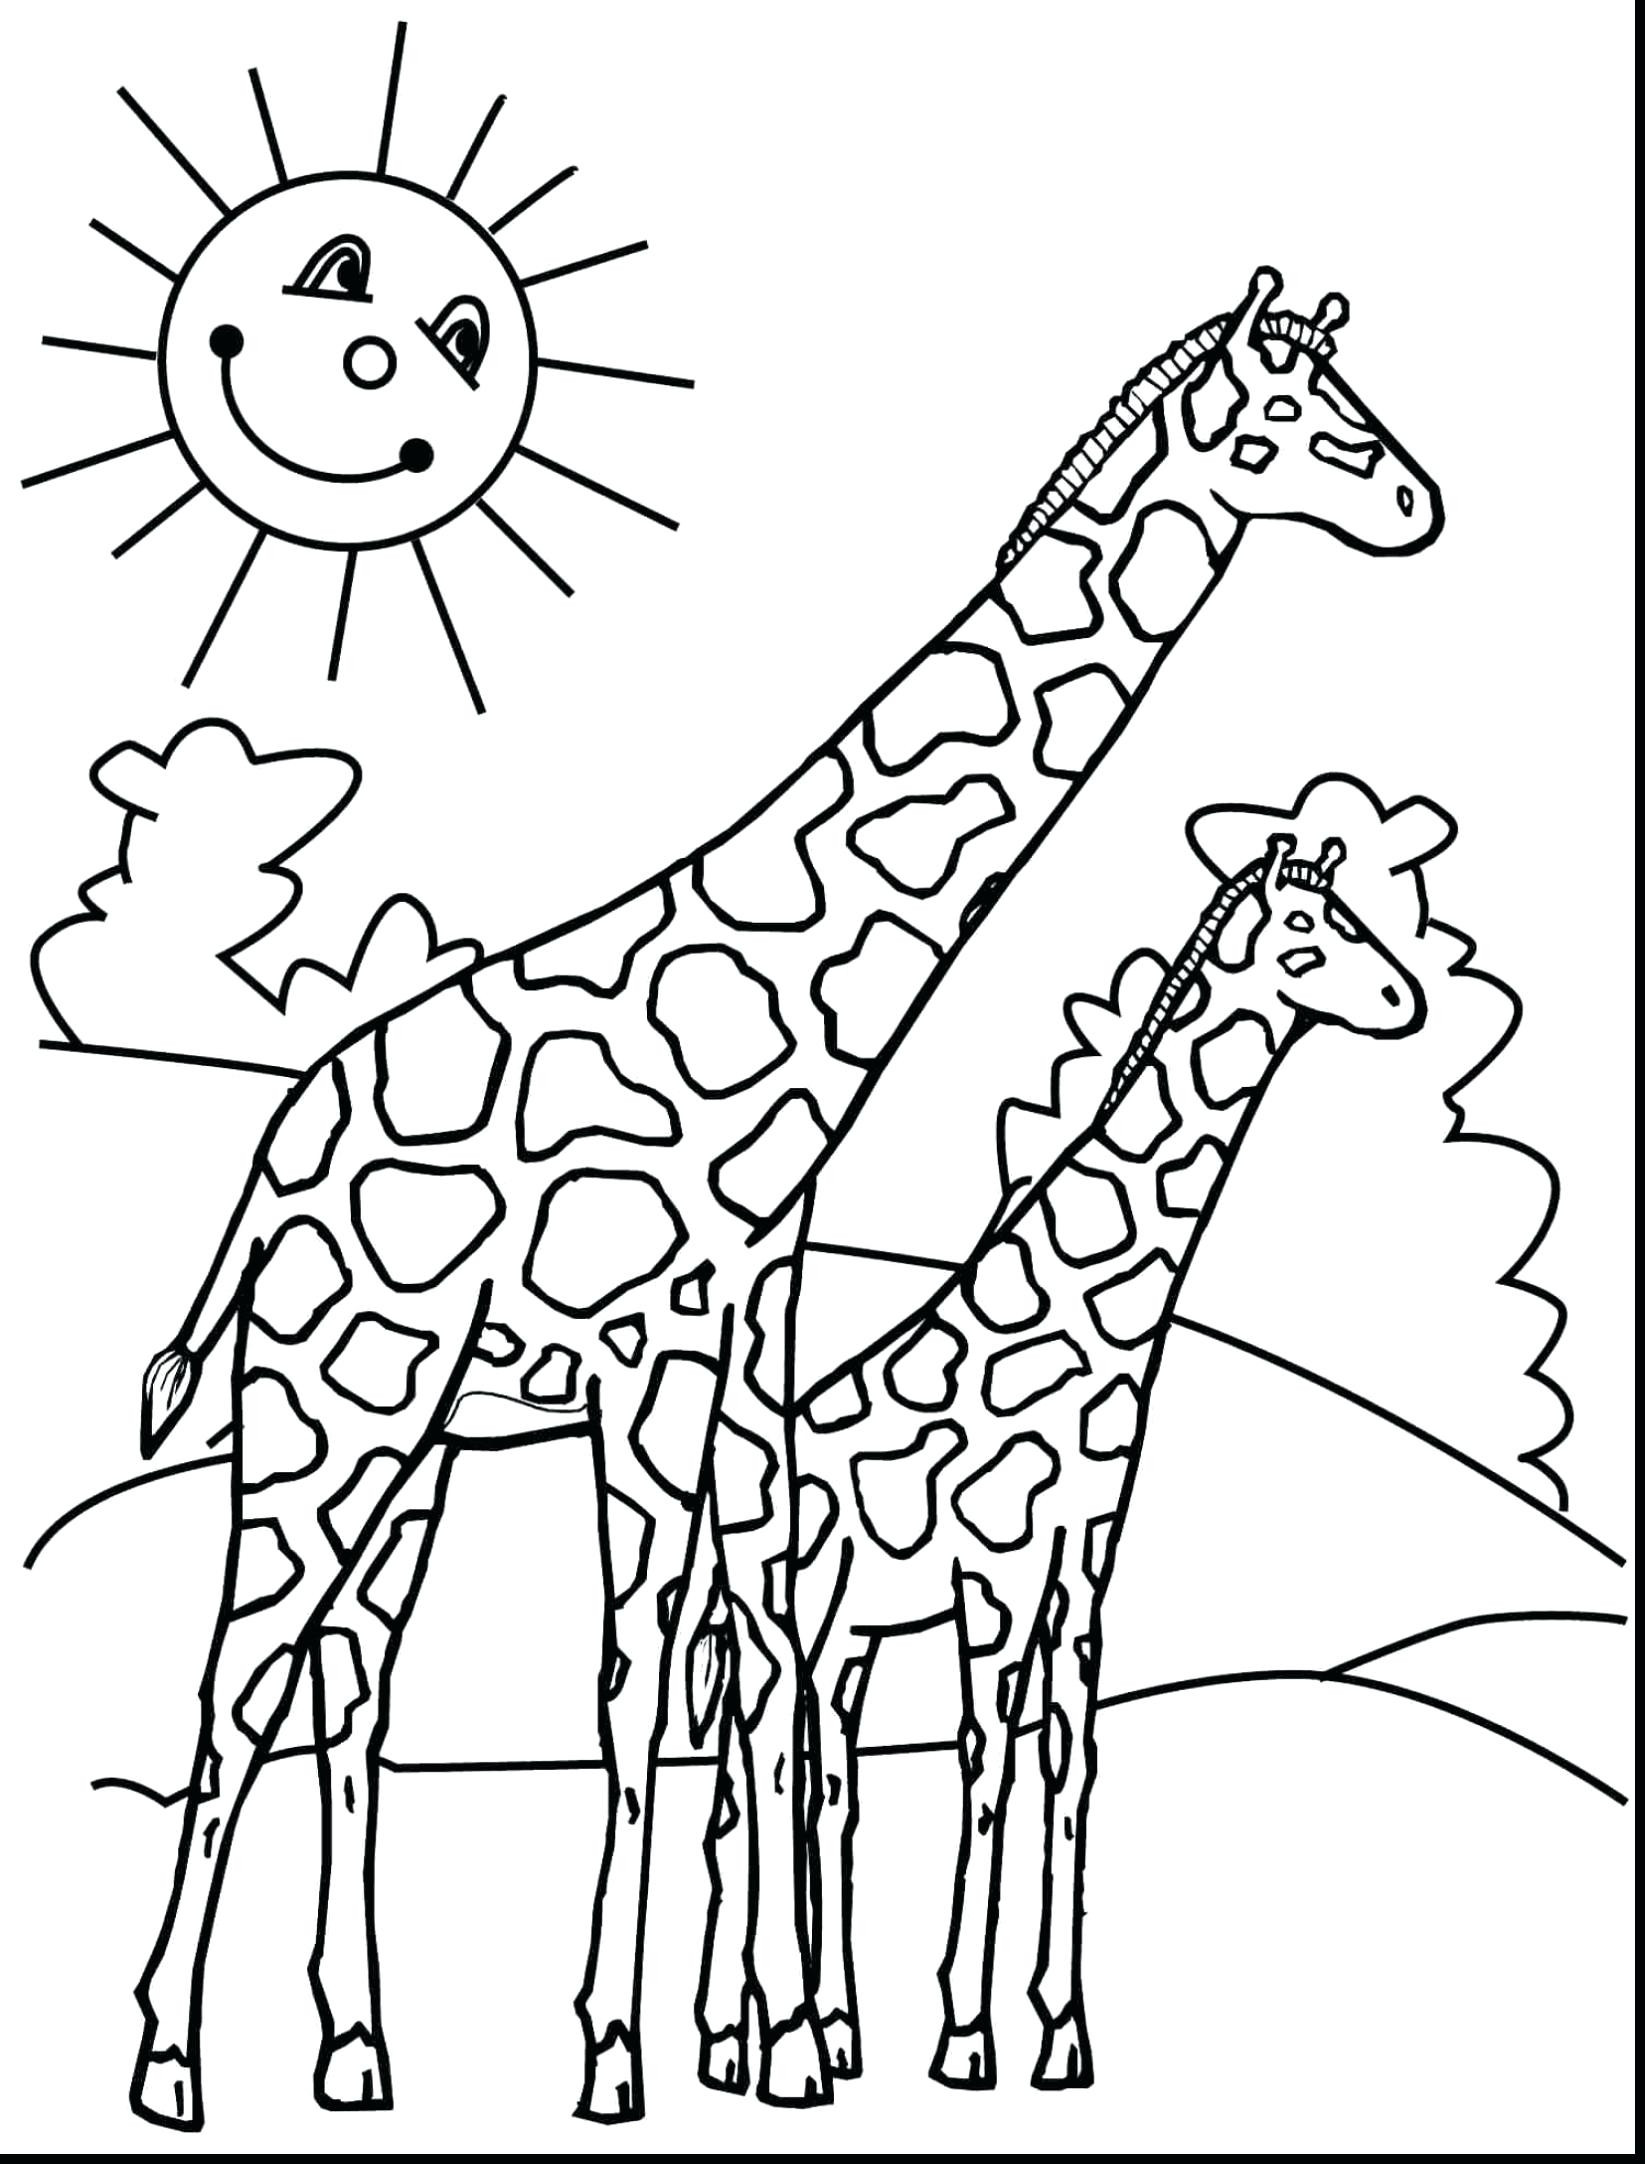 Print Free Coloring Sheets
 Baby Giraffe Coloring Pages Free